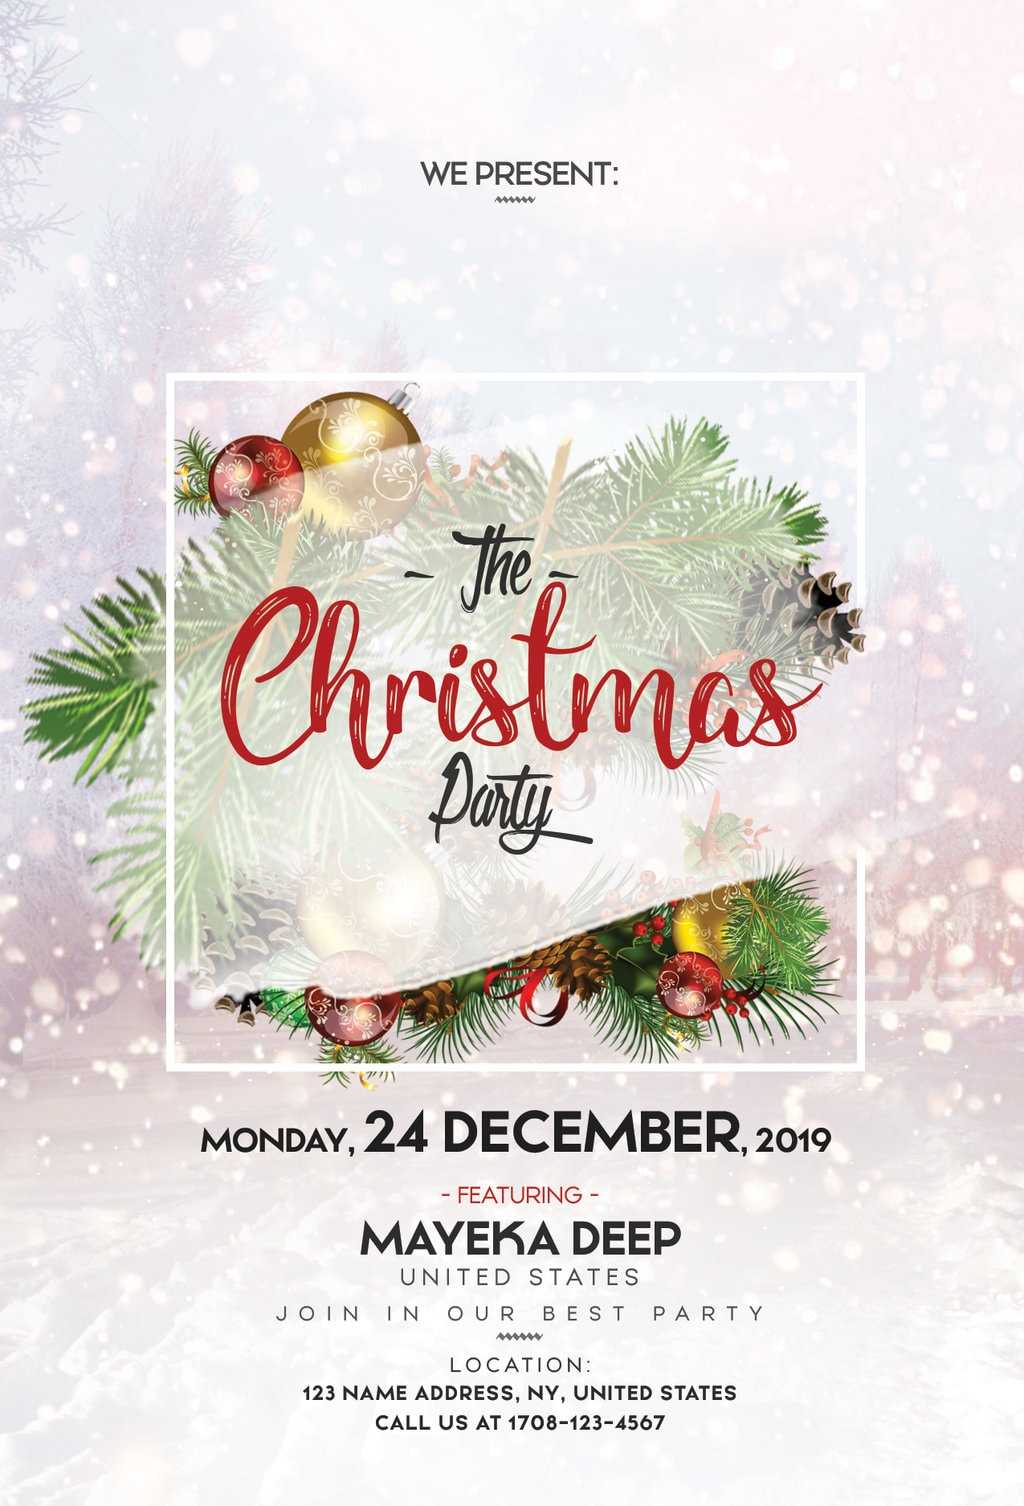 Merry Christmas Free Psd Flyer Template | Freebiedesign For Christmas Brochure Templates Free